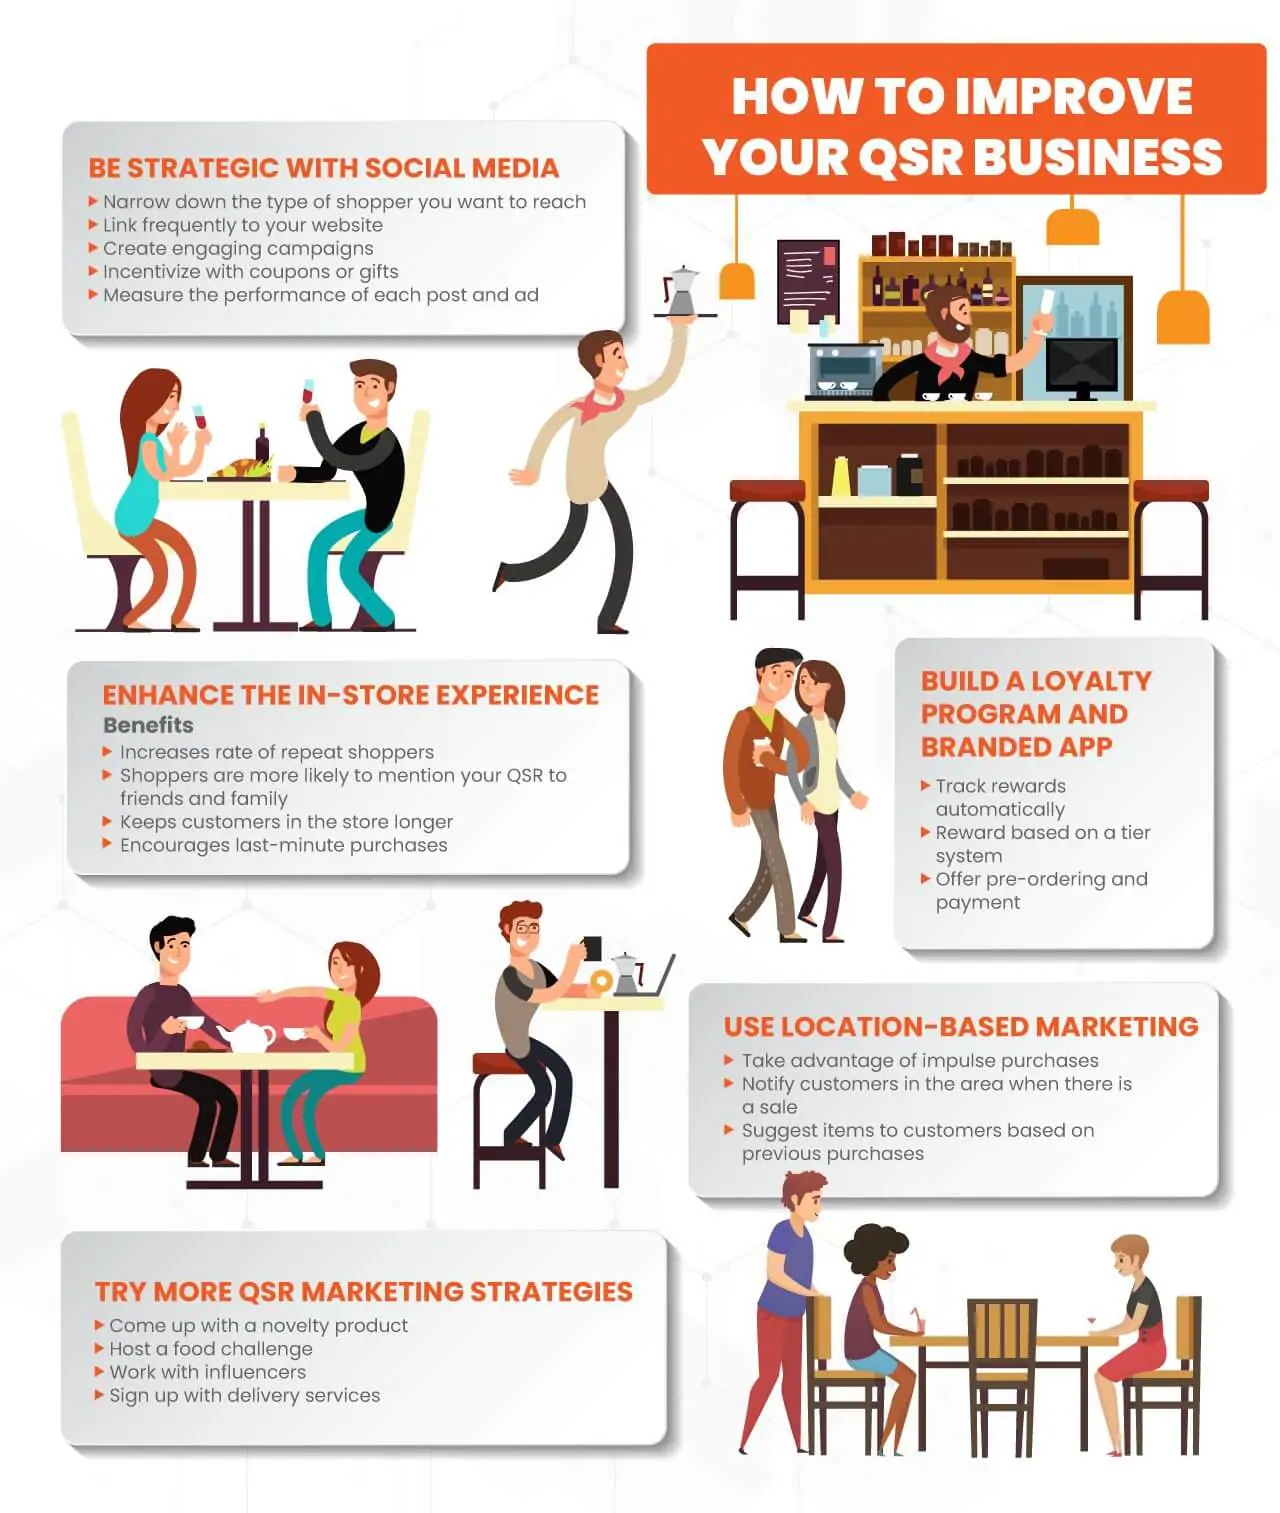 a graphic showing ' how to improve your QSR business'